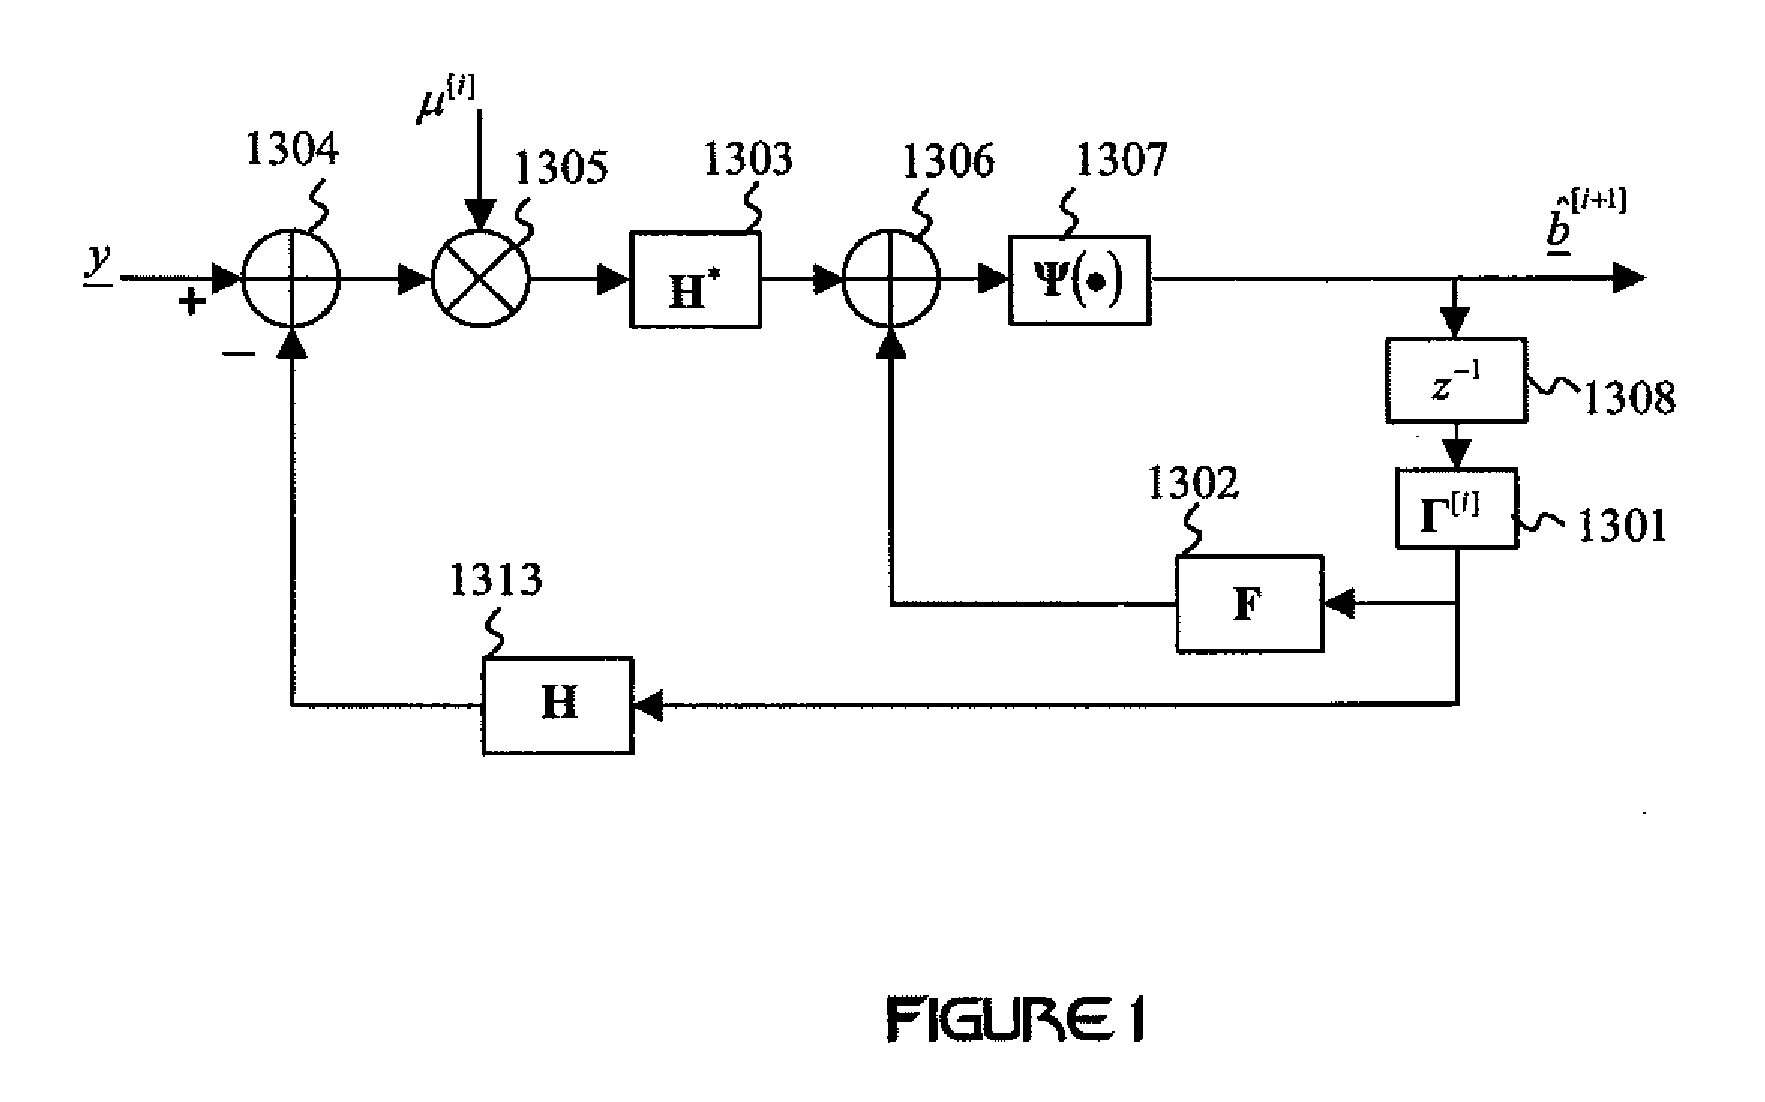 Iterative Interference Cancellation for MIMO-OFDM Receivers